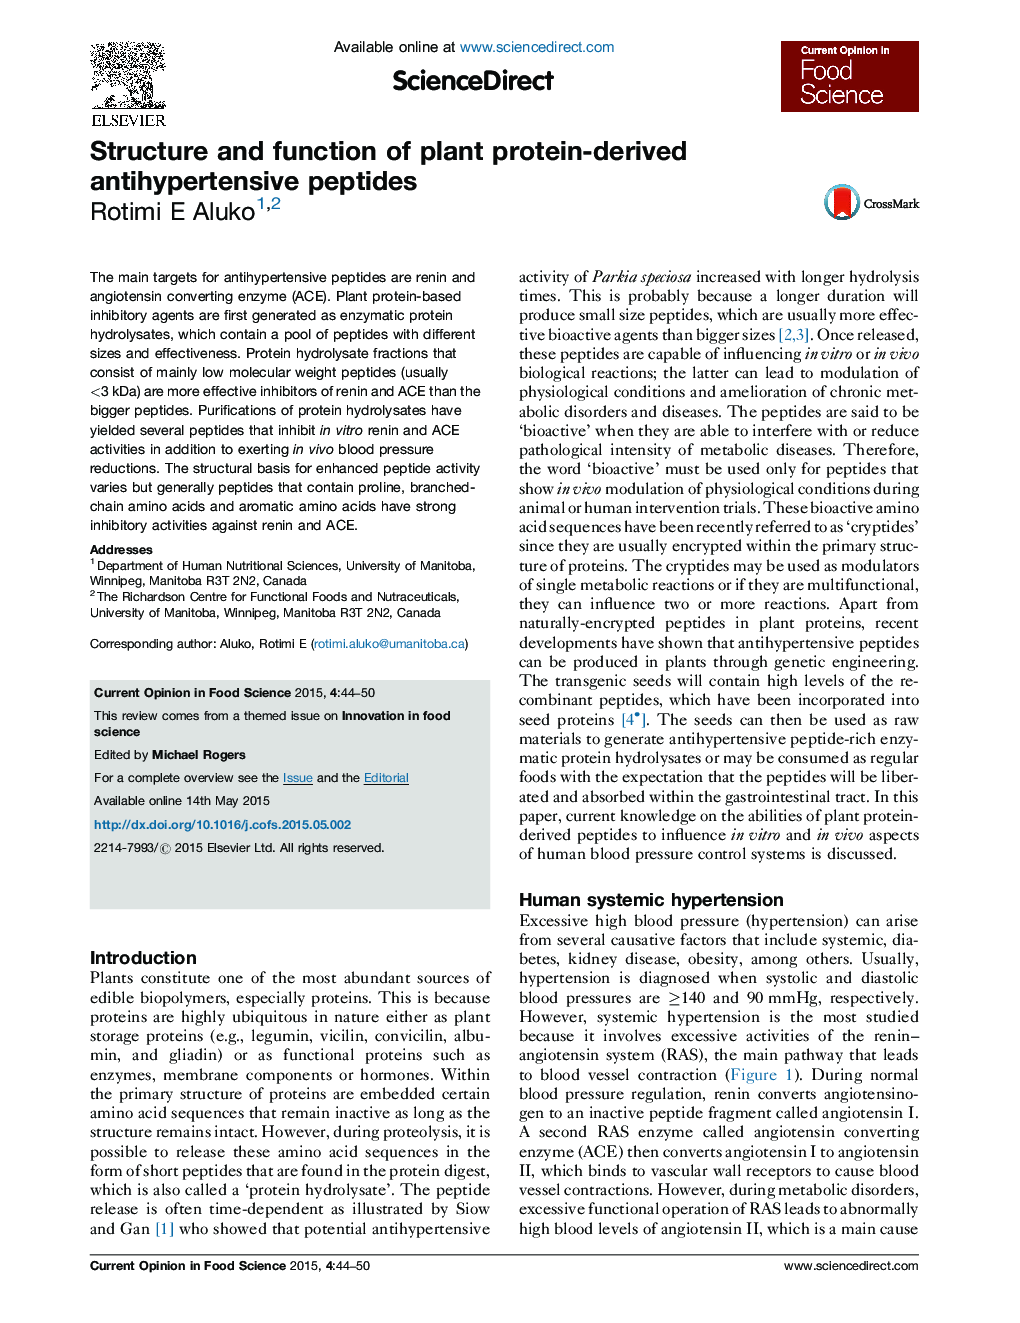 Structure and function of plant protein-derived antihypertensive peptides